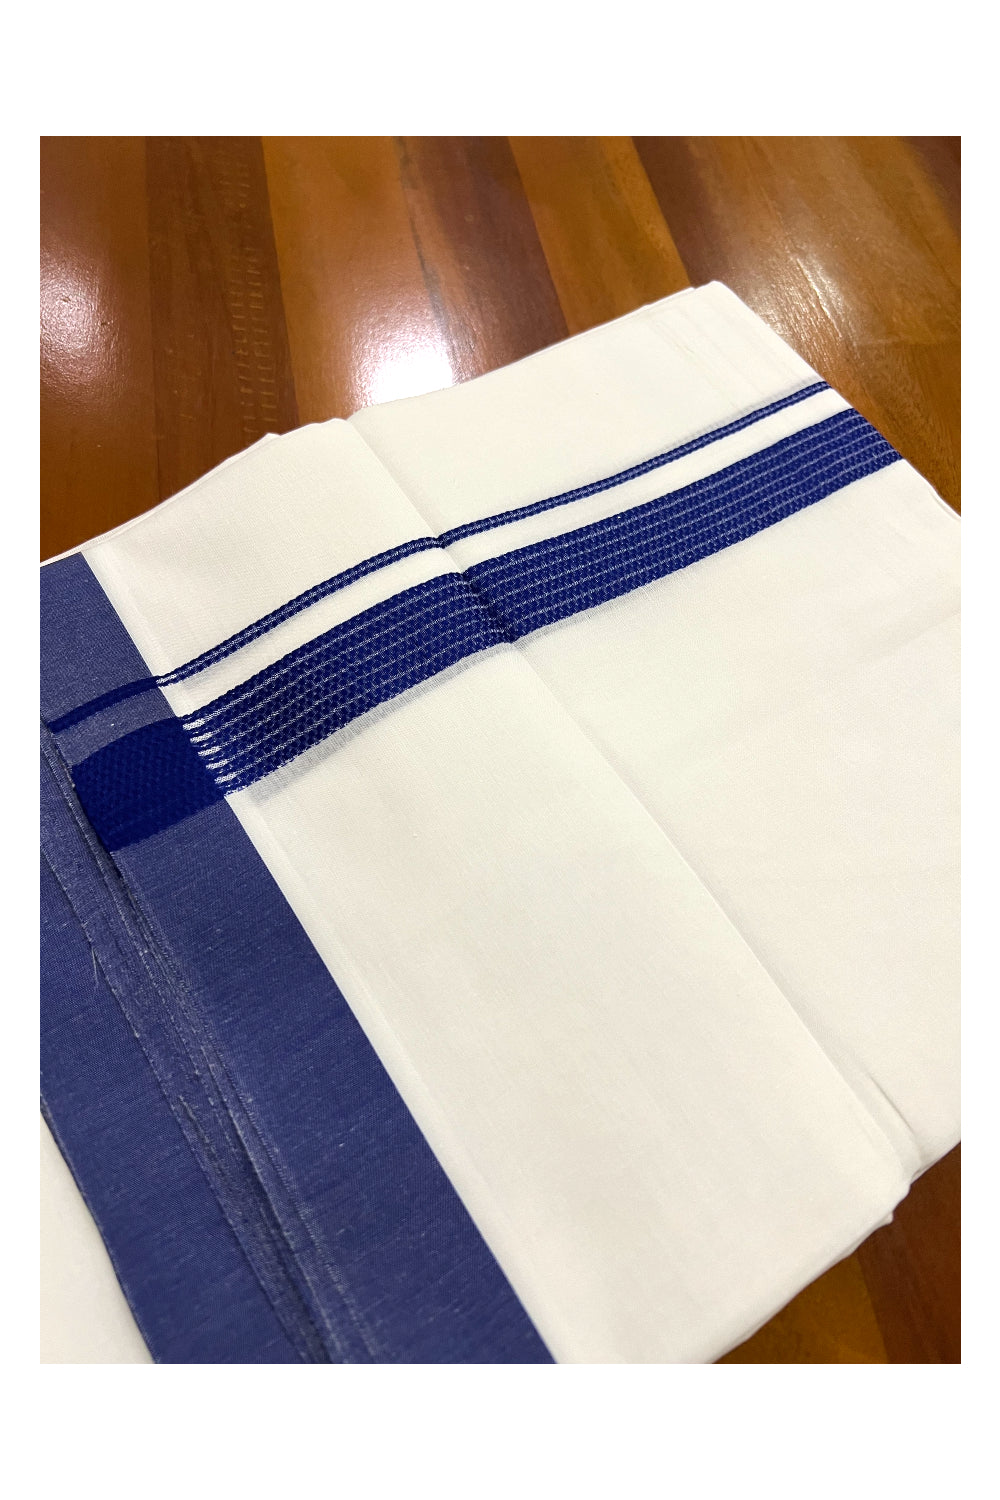 Pure White Cotton Double Mundu with Lines on Blue Border (South Indian Dhoti)